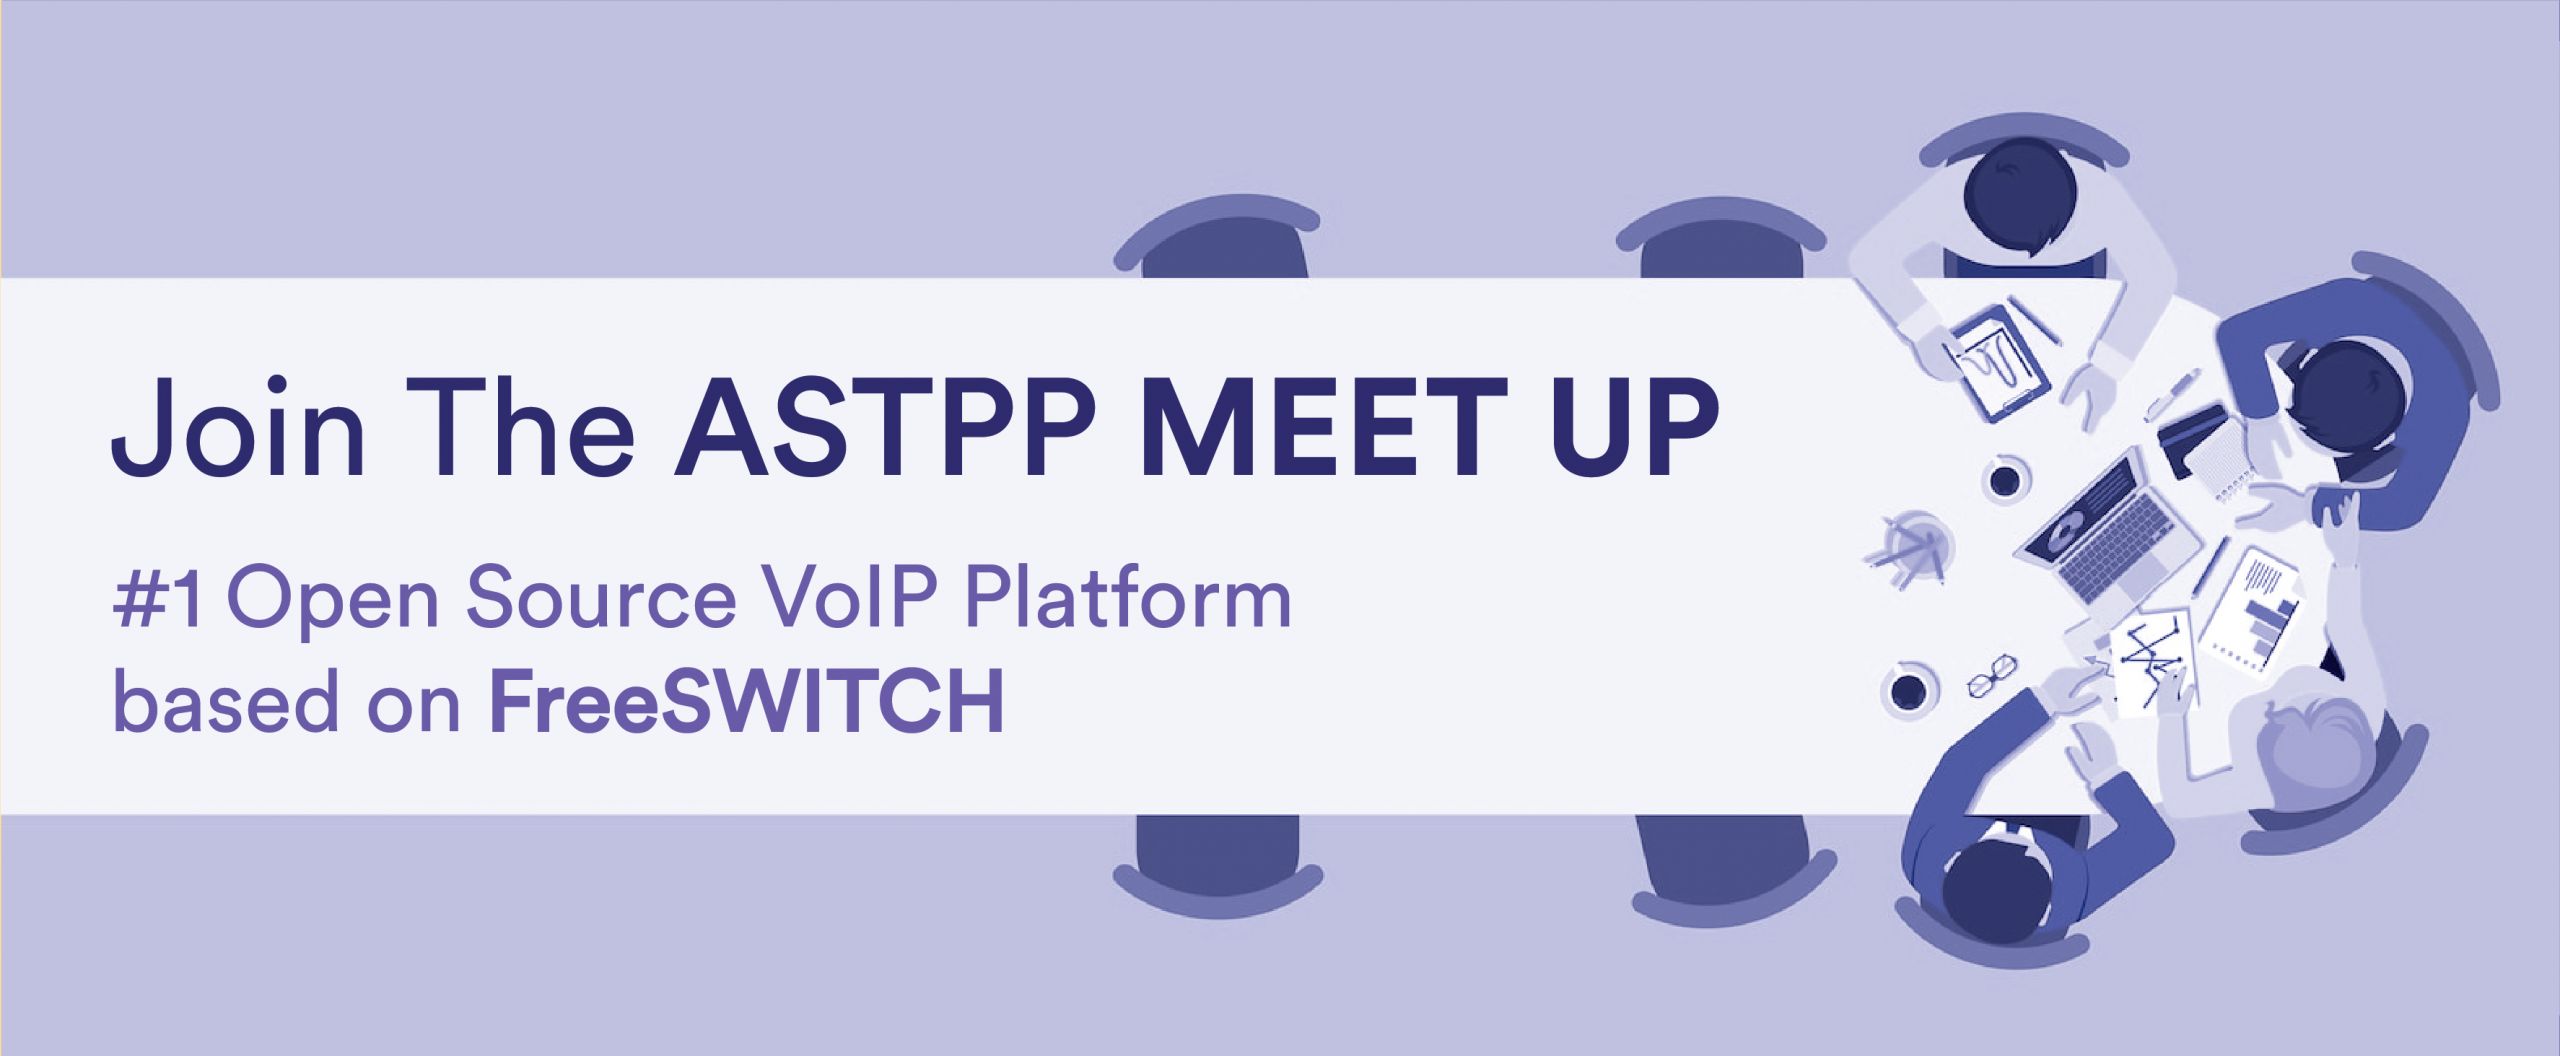 Join The ASTPP Meet UP – #1 Open Source VoIP Platform based on FreeSWITCH